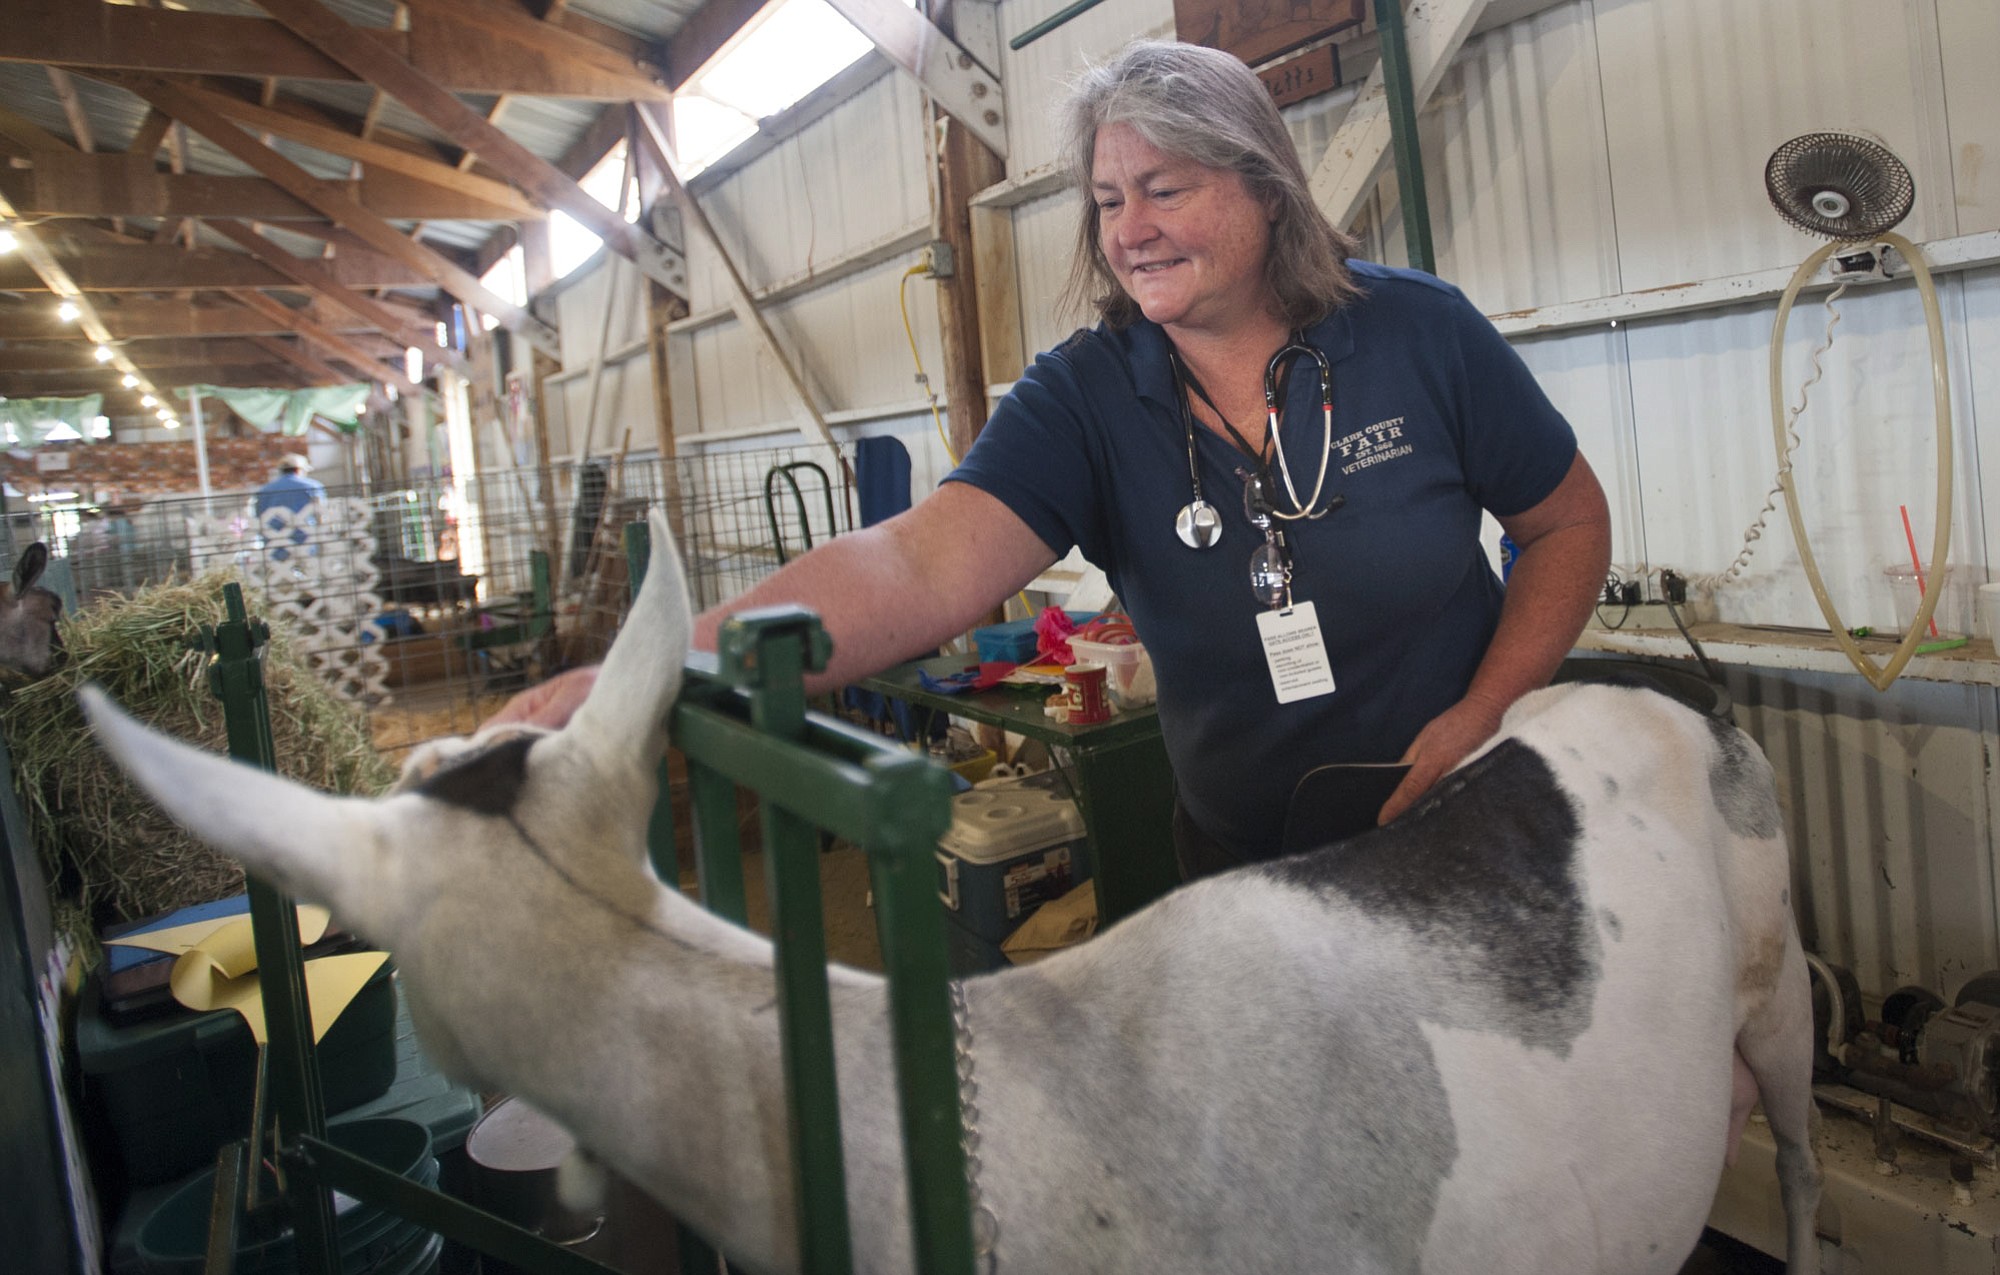 Dr. Mary Ann Haggerty, the fair's volunteer veterinarian, checks over a goat Thursday morning at the Clark County Fairgrounds in Ridgefield.